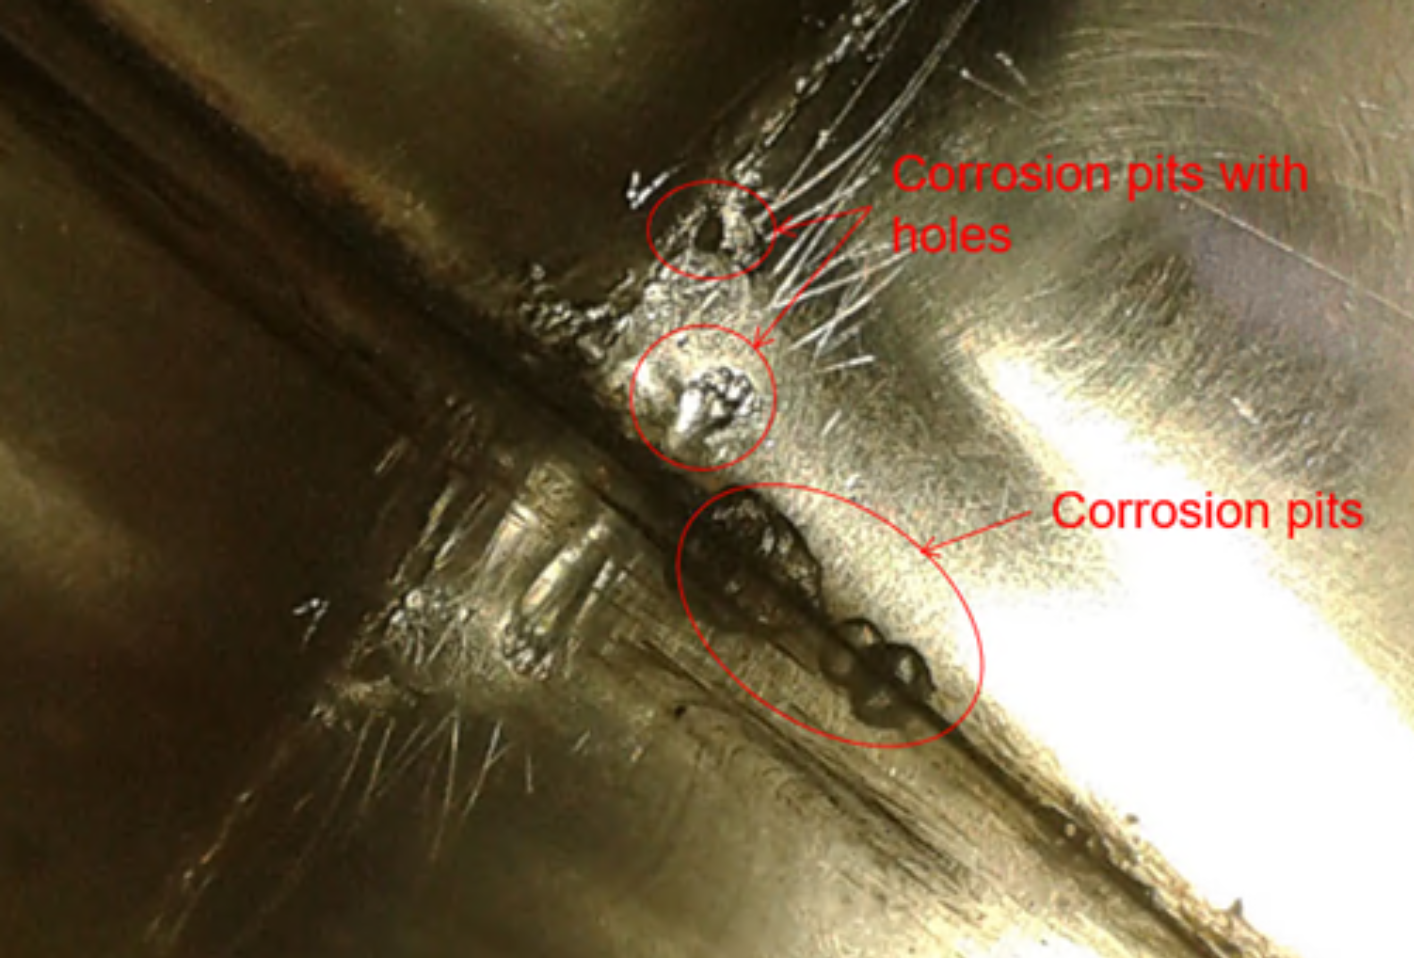 Corrosion caused by bacteria